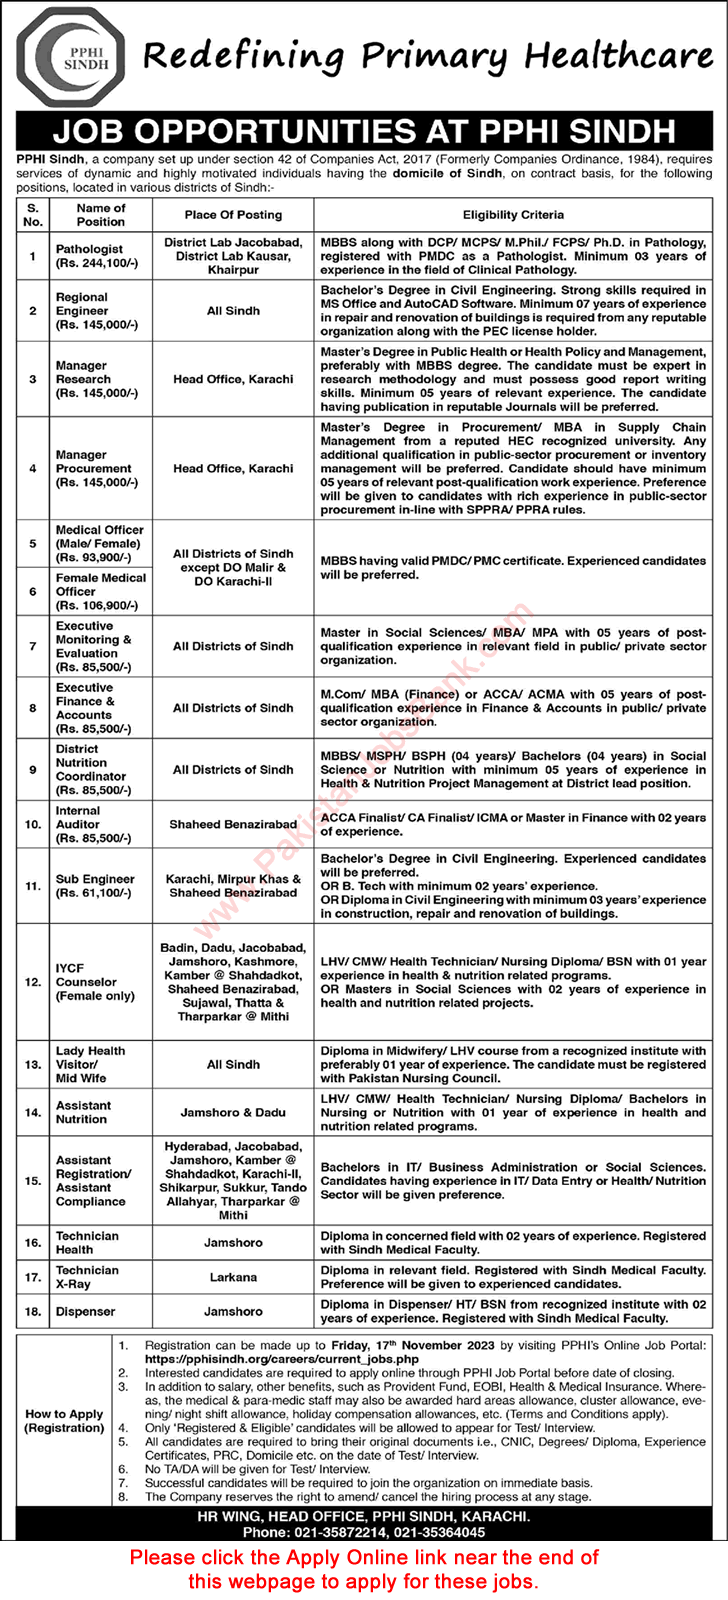 PPHI Sindh Jobs November 2023 Apply Online People's Primary Healthcare Initiative Latest